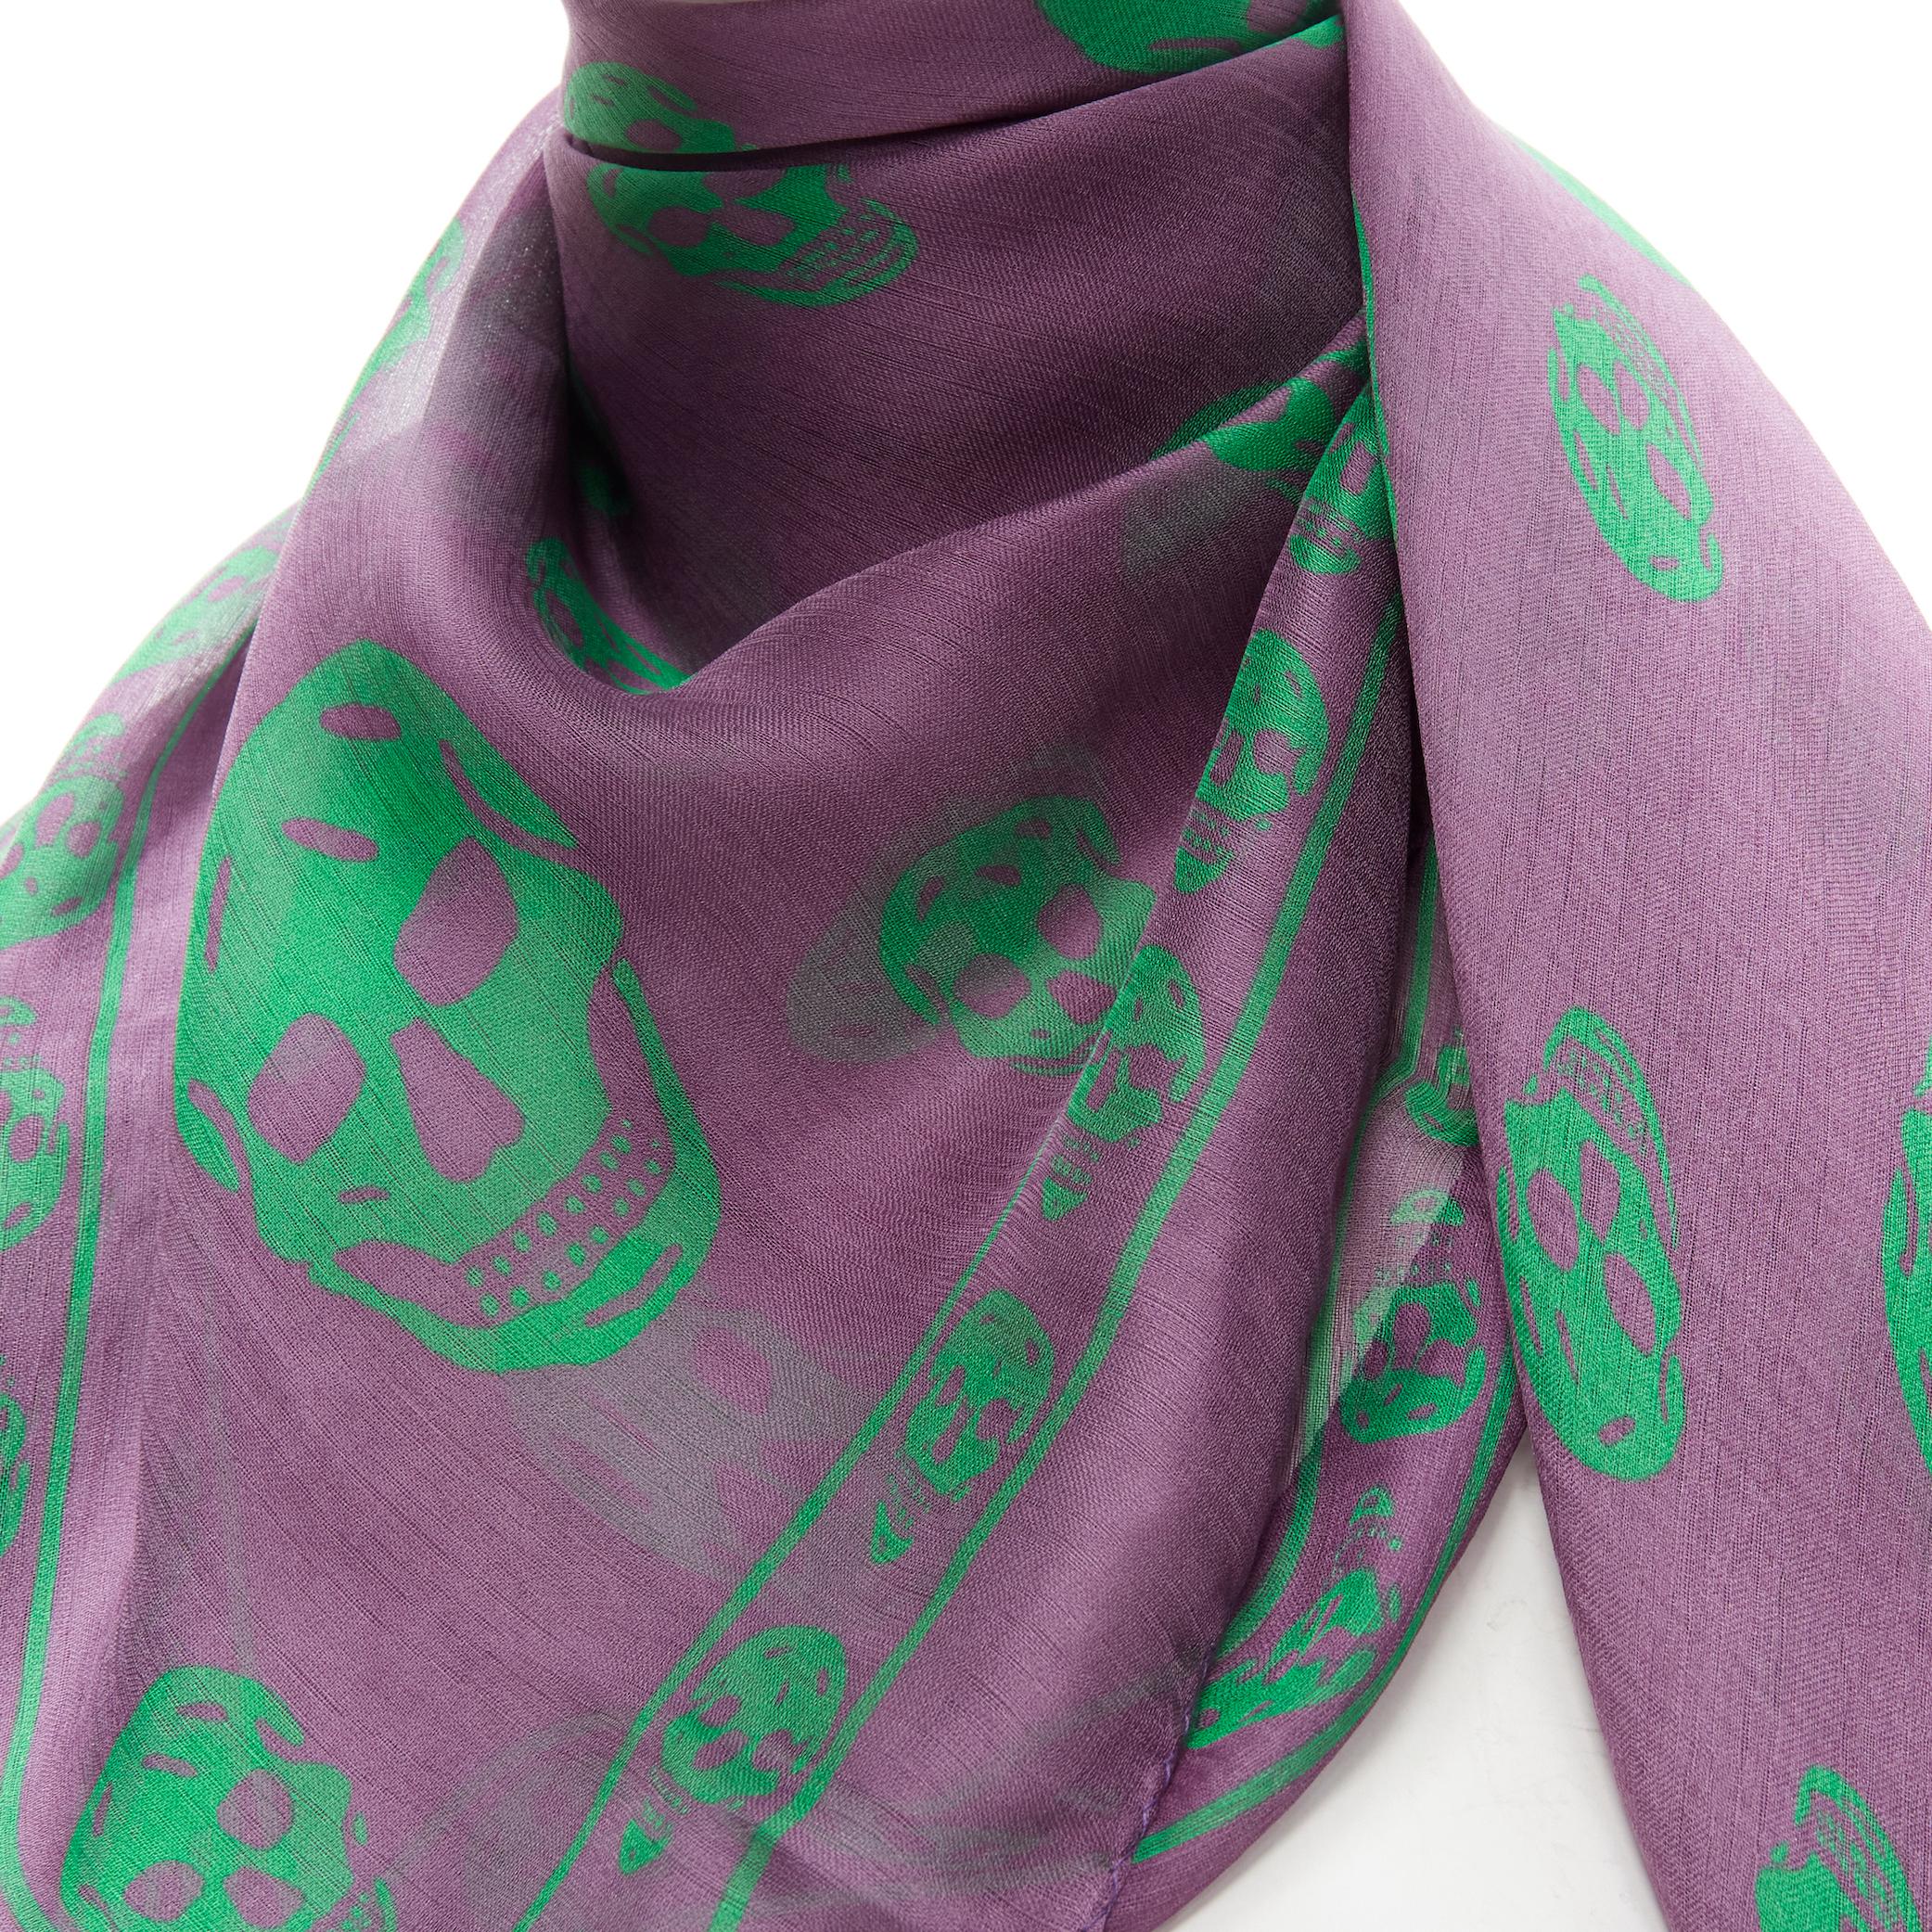 rare ALEXANDER MCQUEEN Signature skeleton skull purple green 100% silk scarf 
Reference: ANWU/A00583 
Brand: Alexander McQueen 
Material: Silk 
Color: Purple 
Pattern: Skull 
Made in: Italy 

CONDITION: 
Condition: Excellent, this item was pre-owned